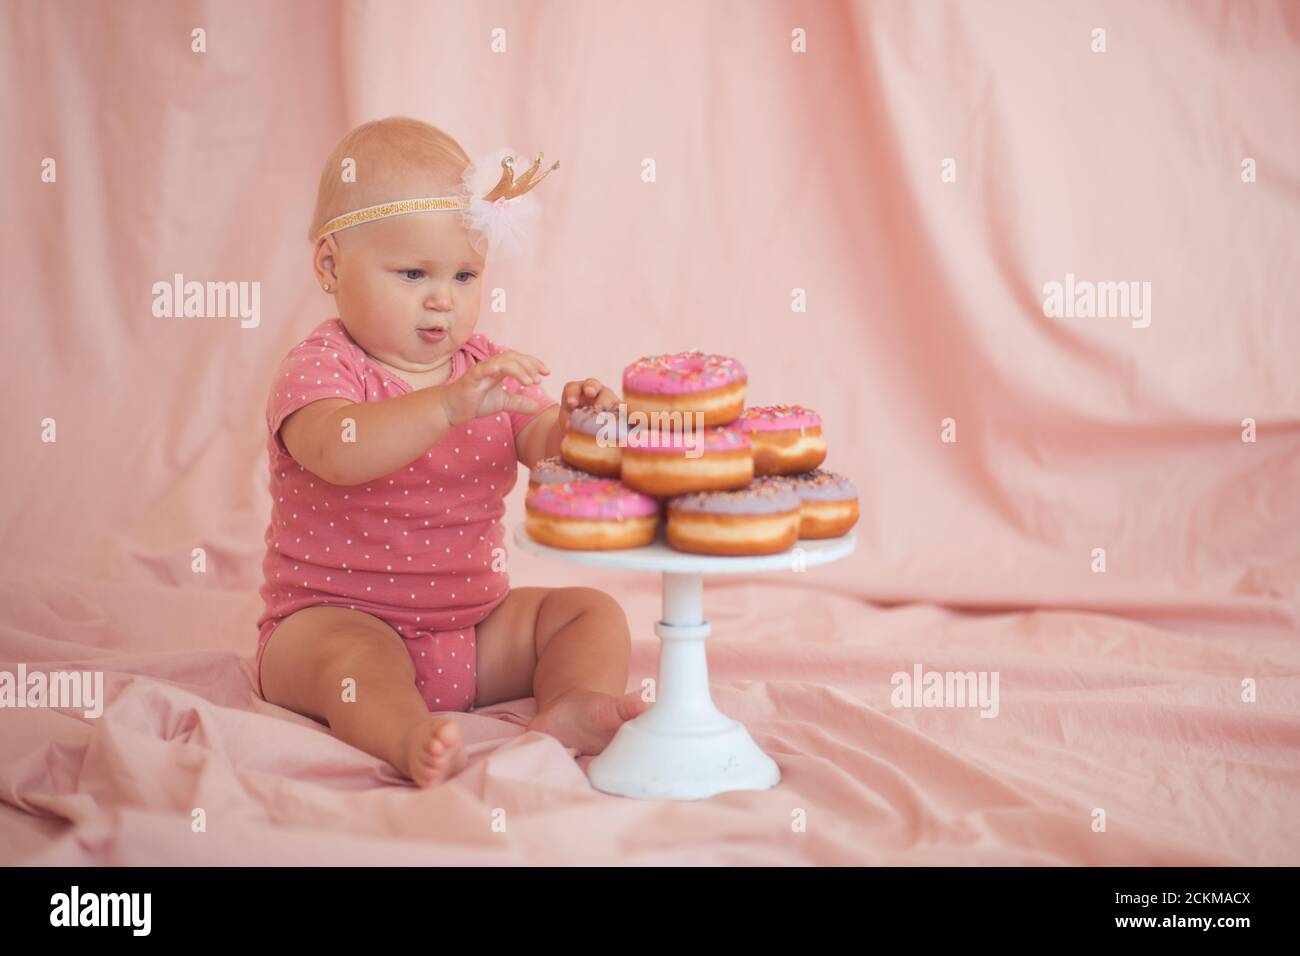 Cute baby girl 1 year old eating tasty glazed donuts sittin on floor over pink textile background closeup. Birthday party. Celebration. Stock Photo